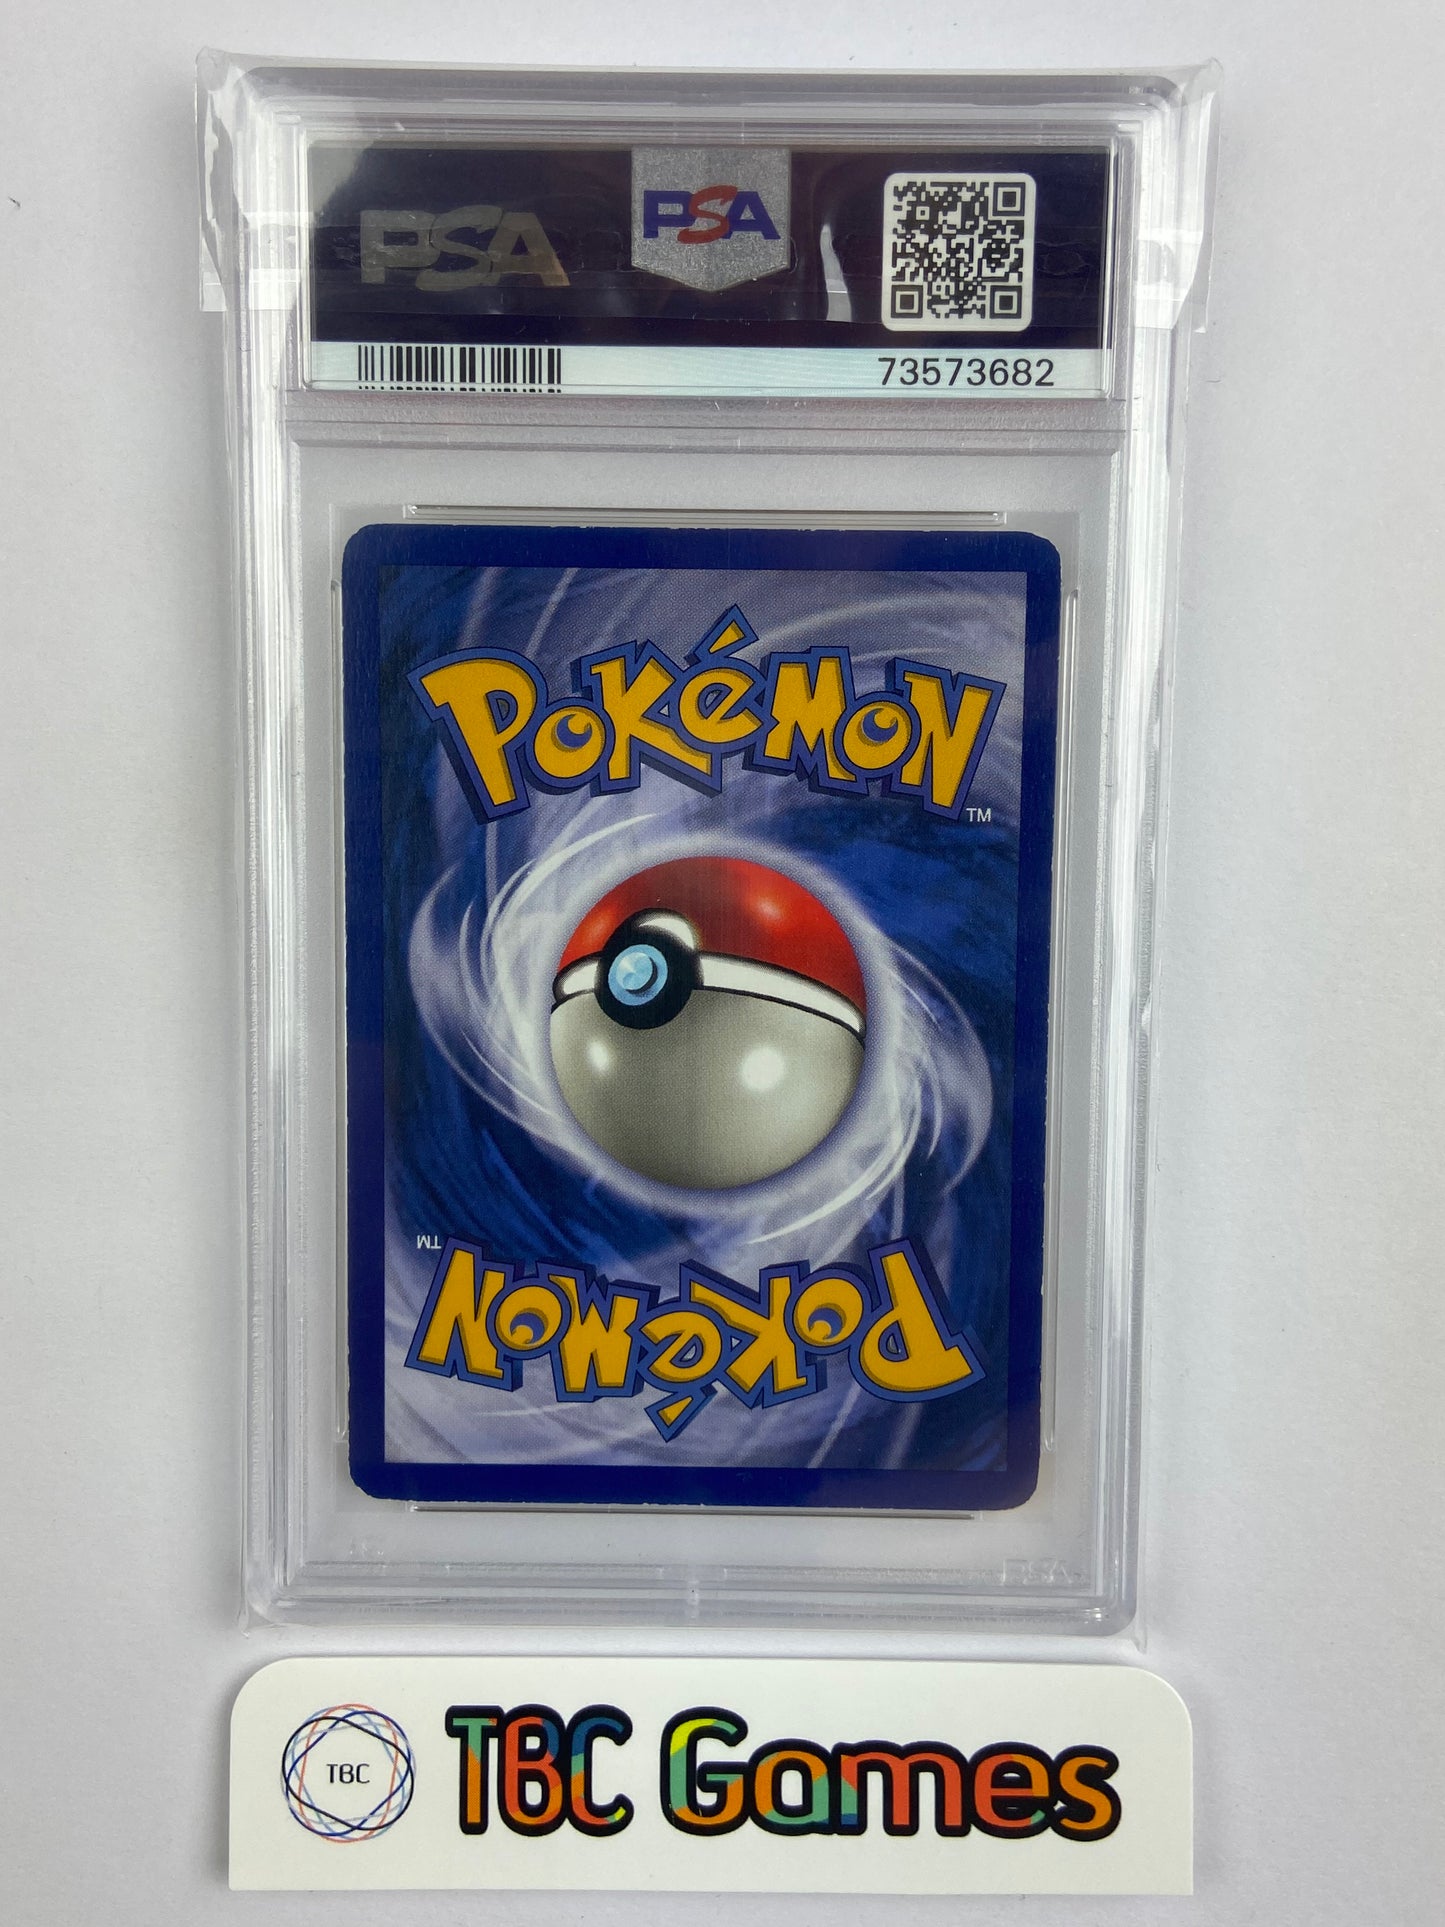 Dragonite Fossil 1st Edition Holo 4/62 PSA 5